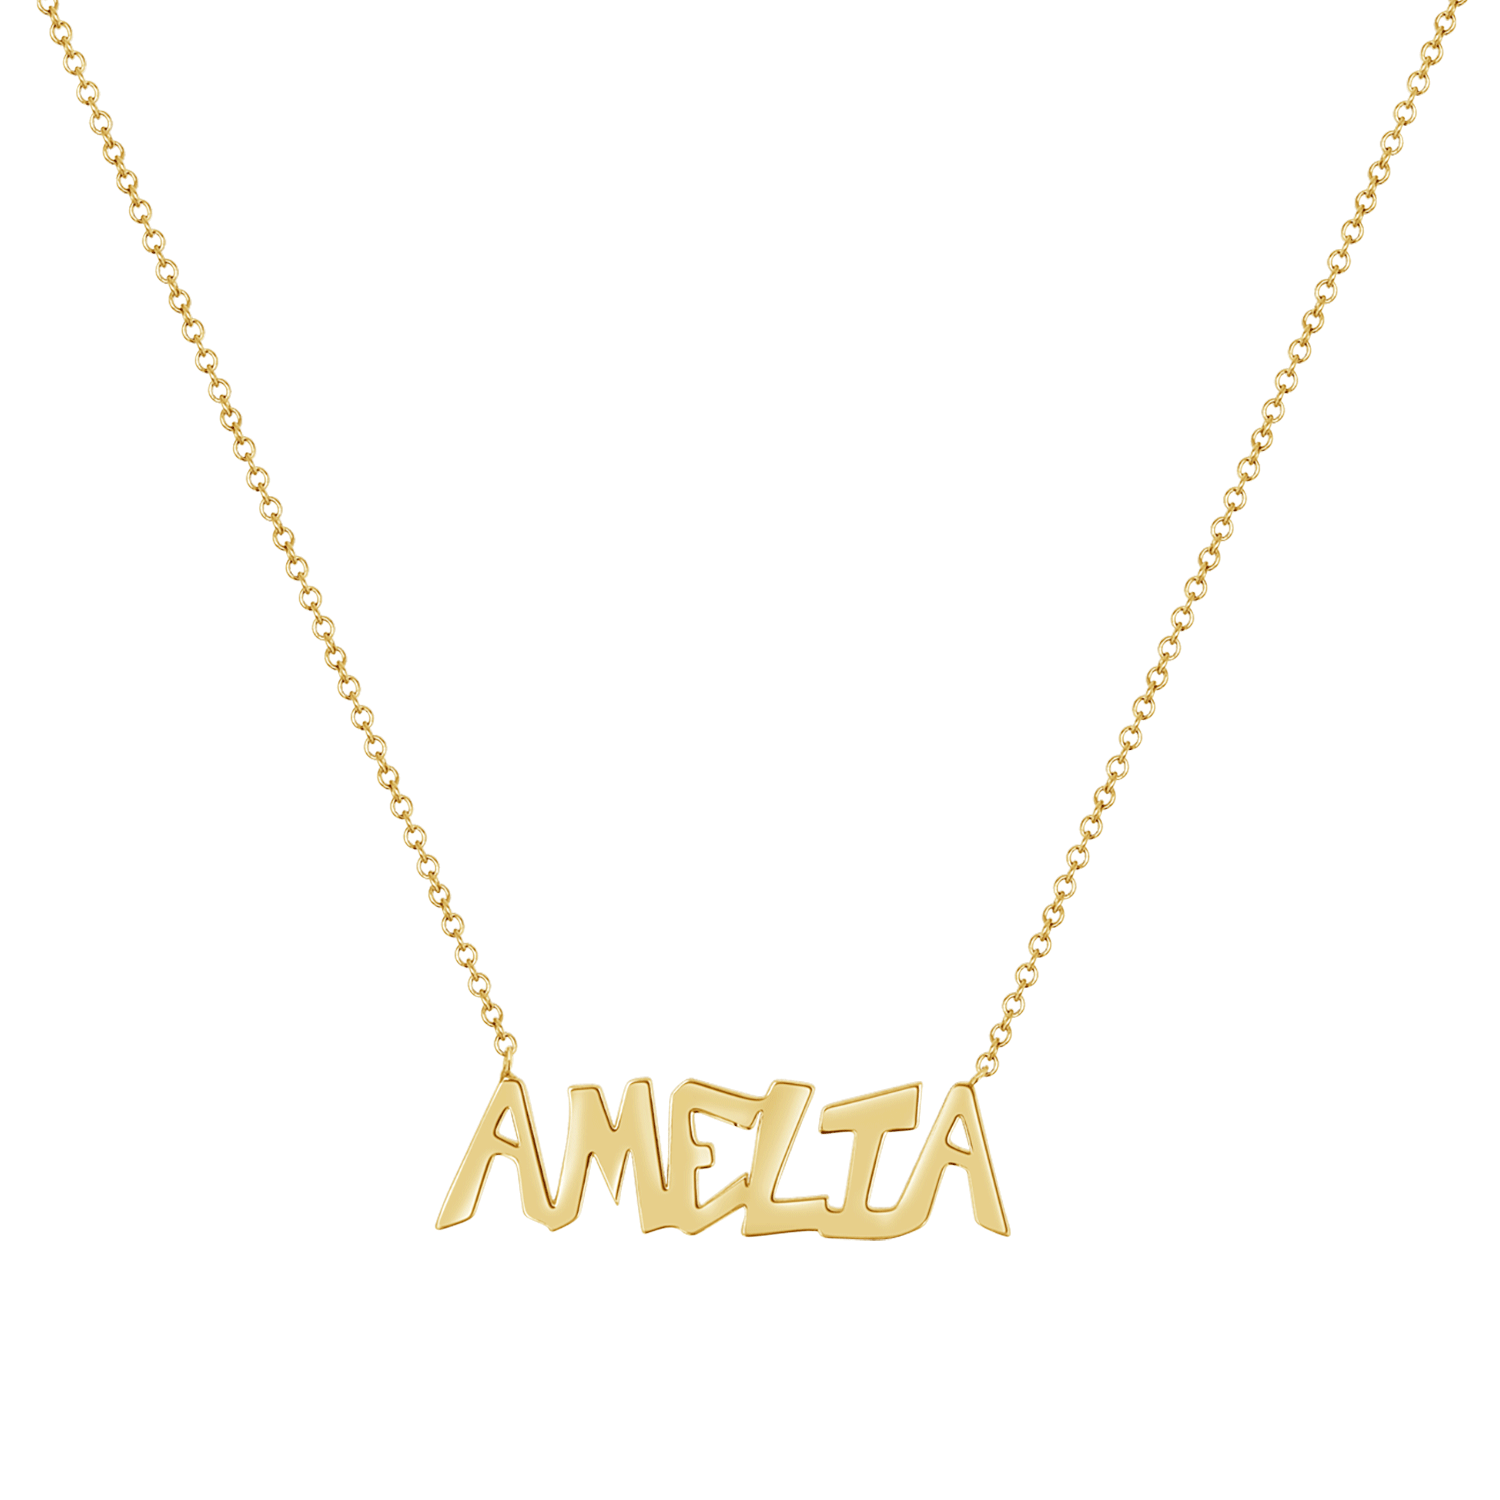 name necklace, name pendant, solid gold necklace